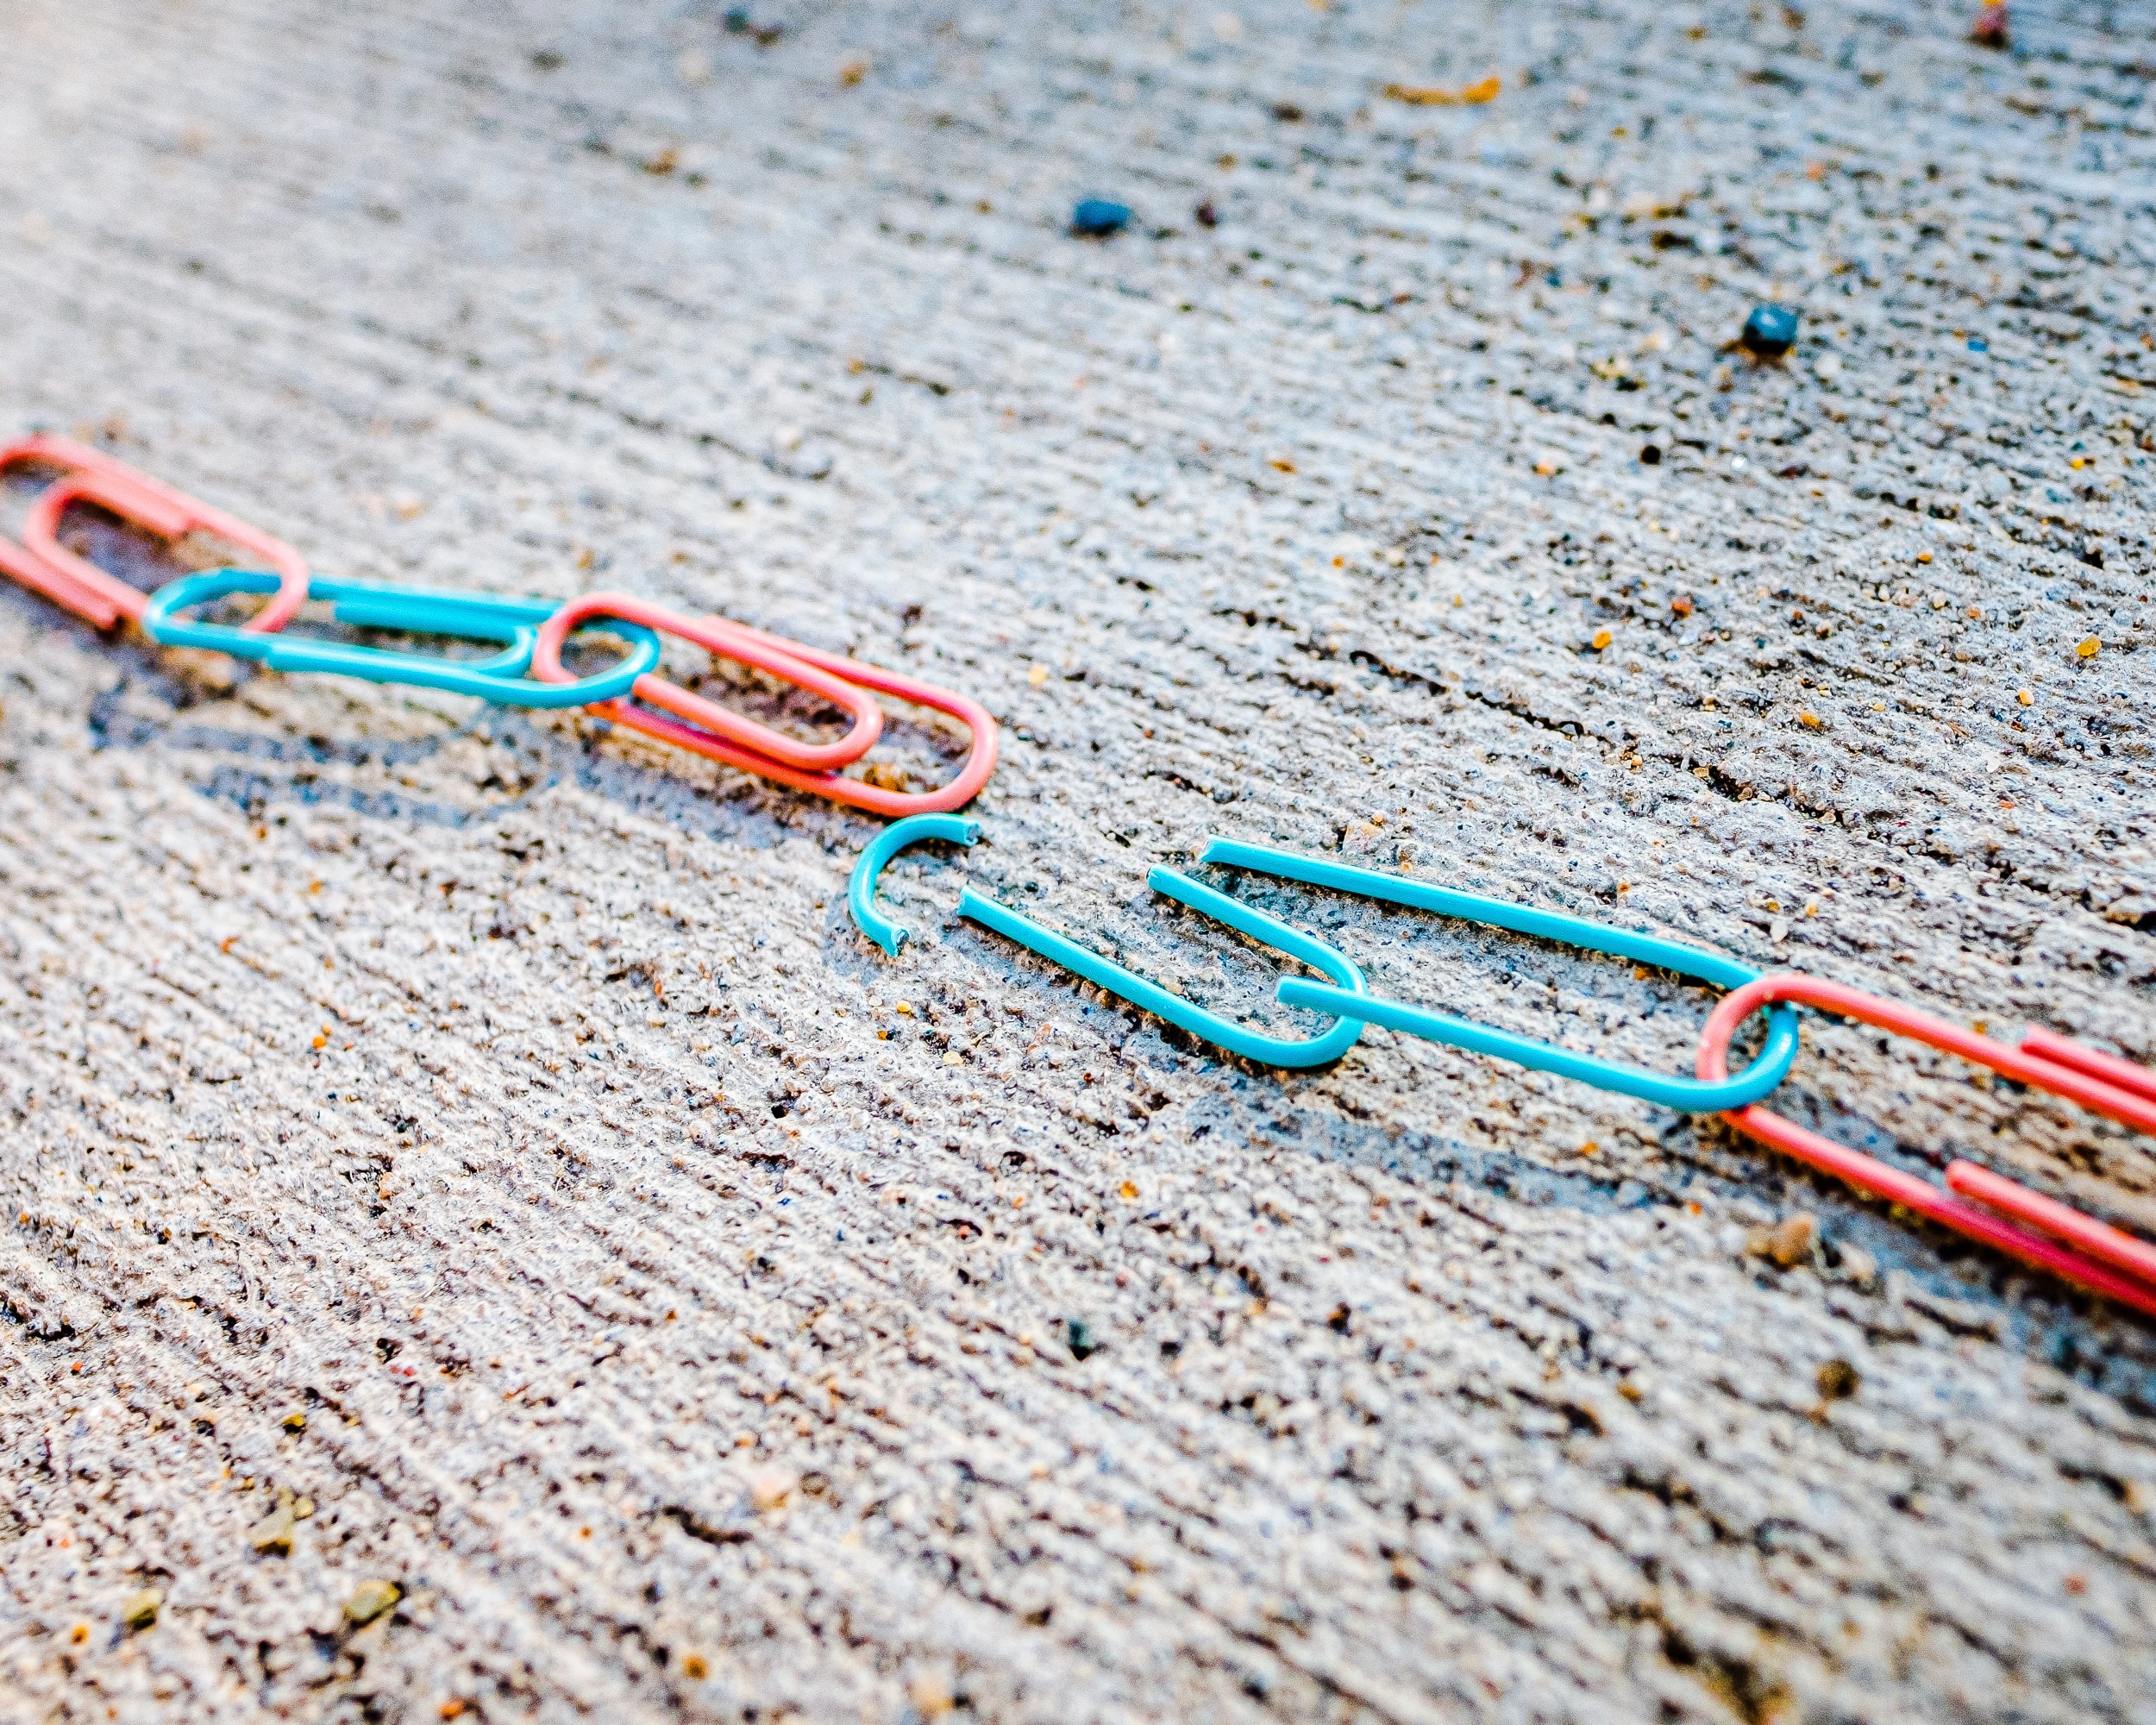 Broken chain of blue and red paperclips; image by Jackson Simmer, via Unsplash.com.